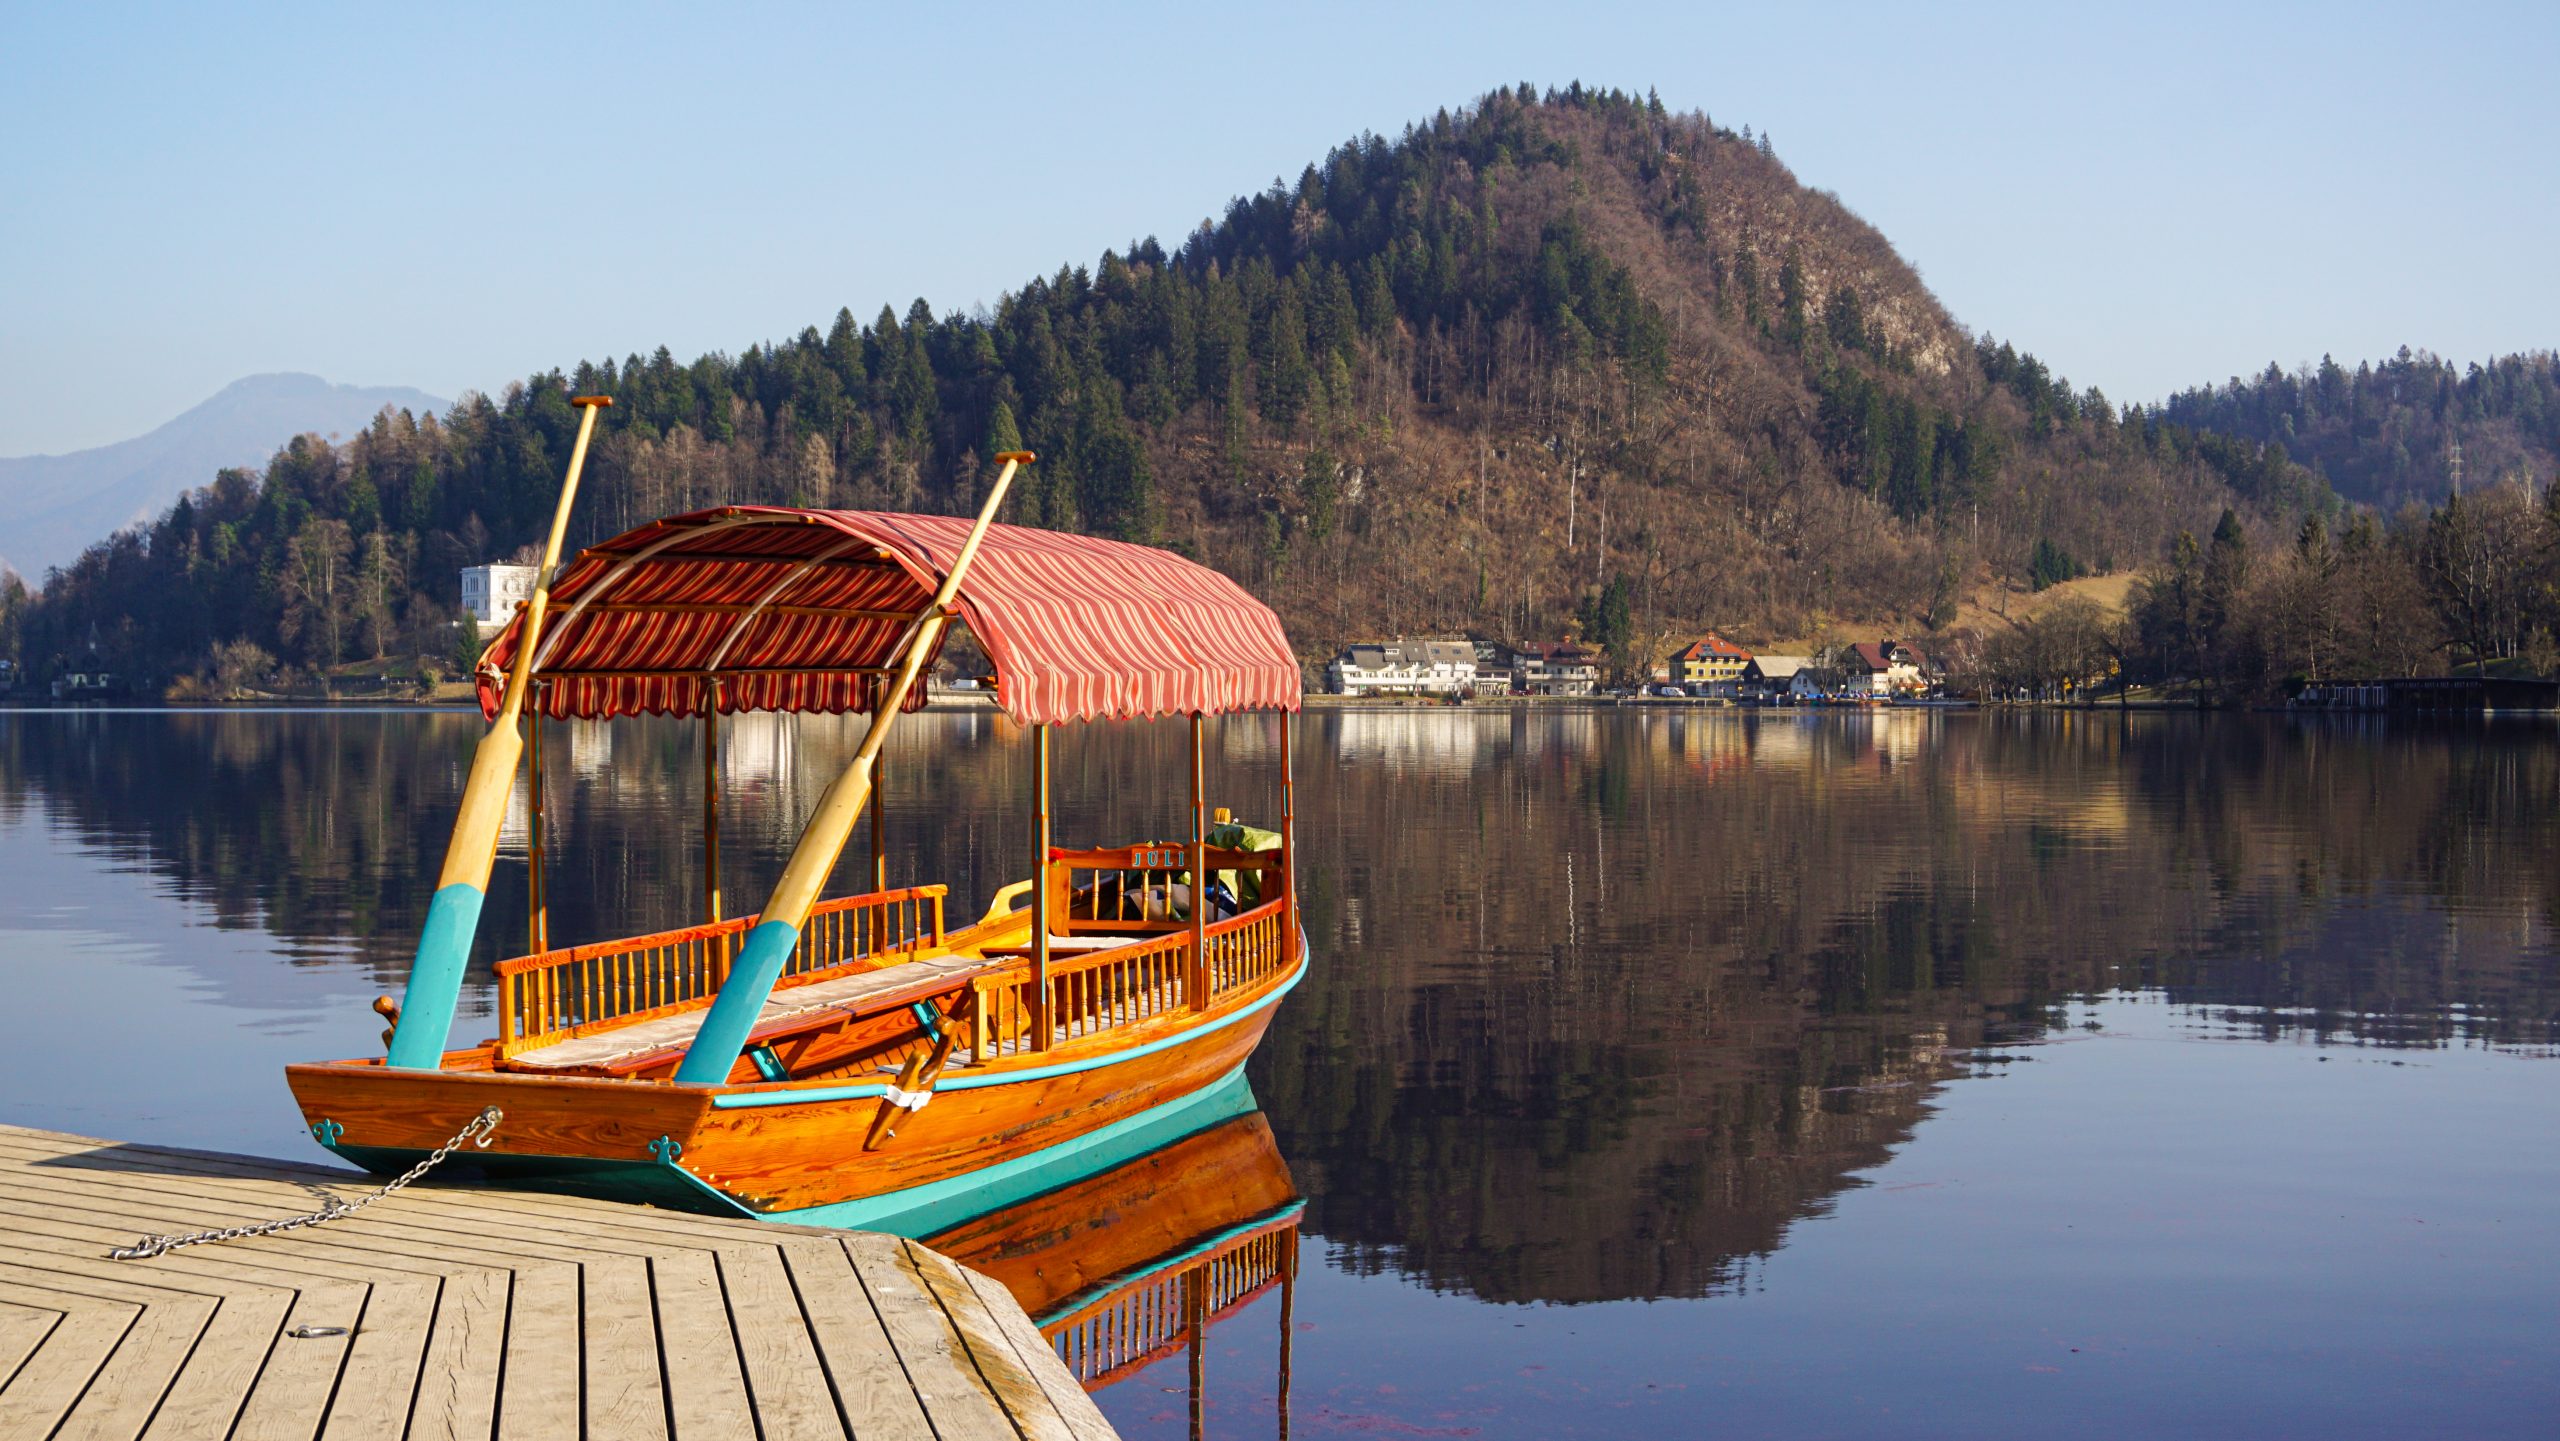 A Pletna boat parked at Bled Island